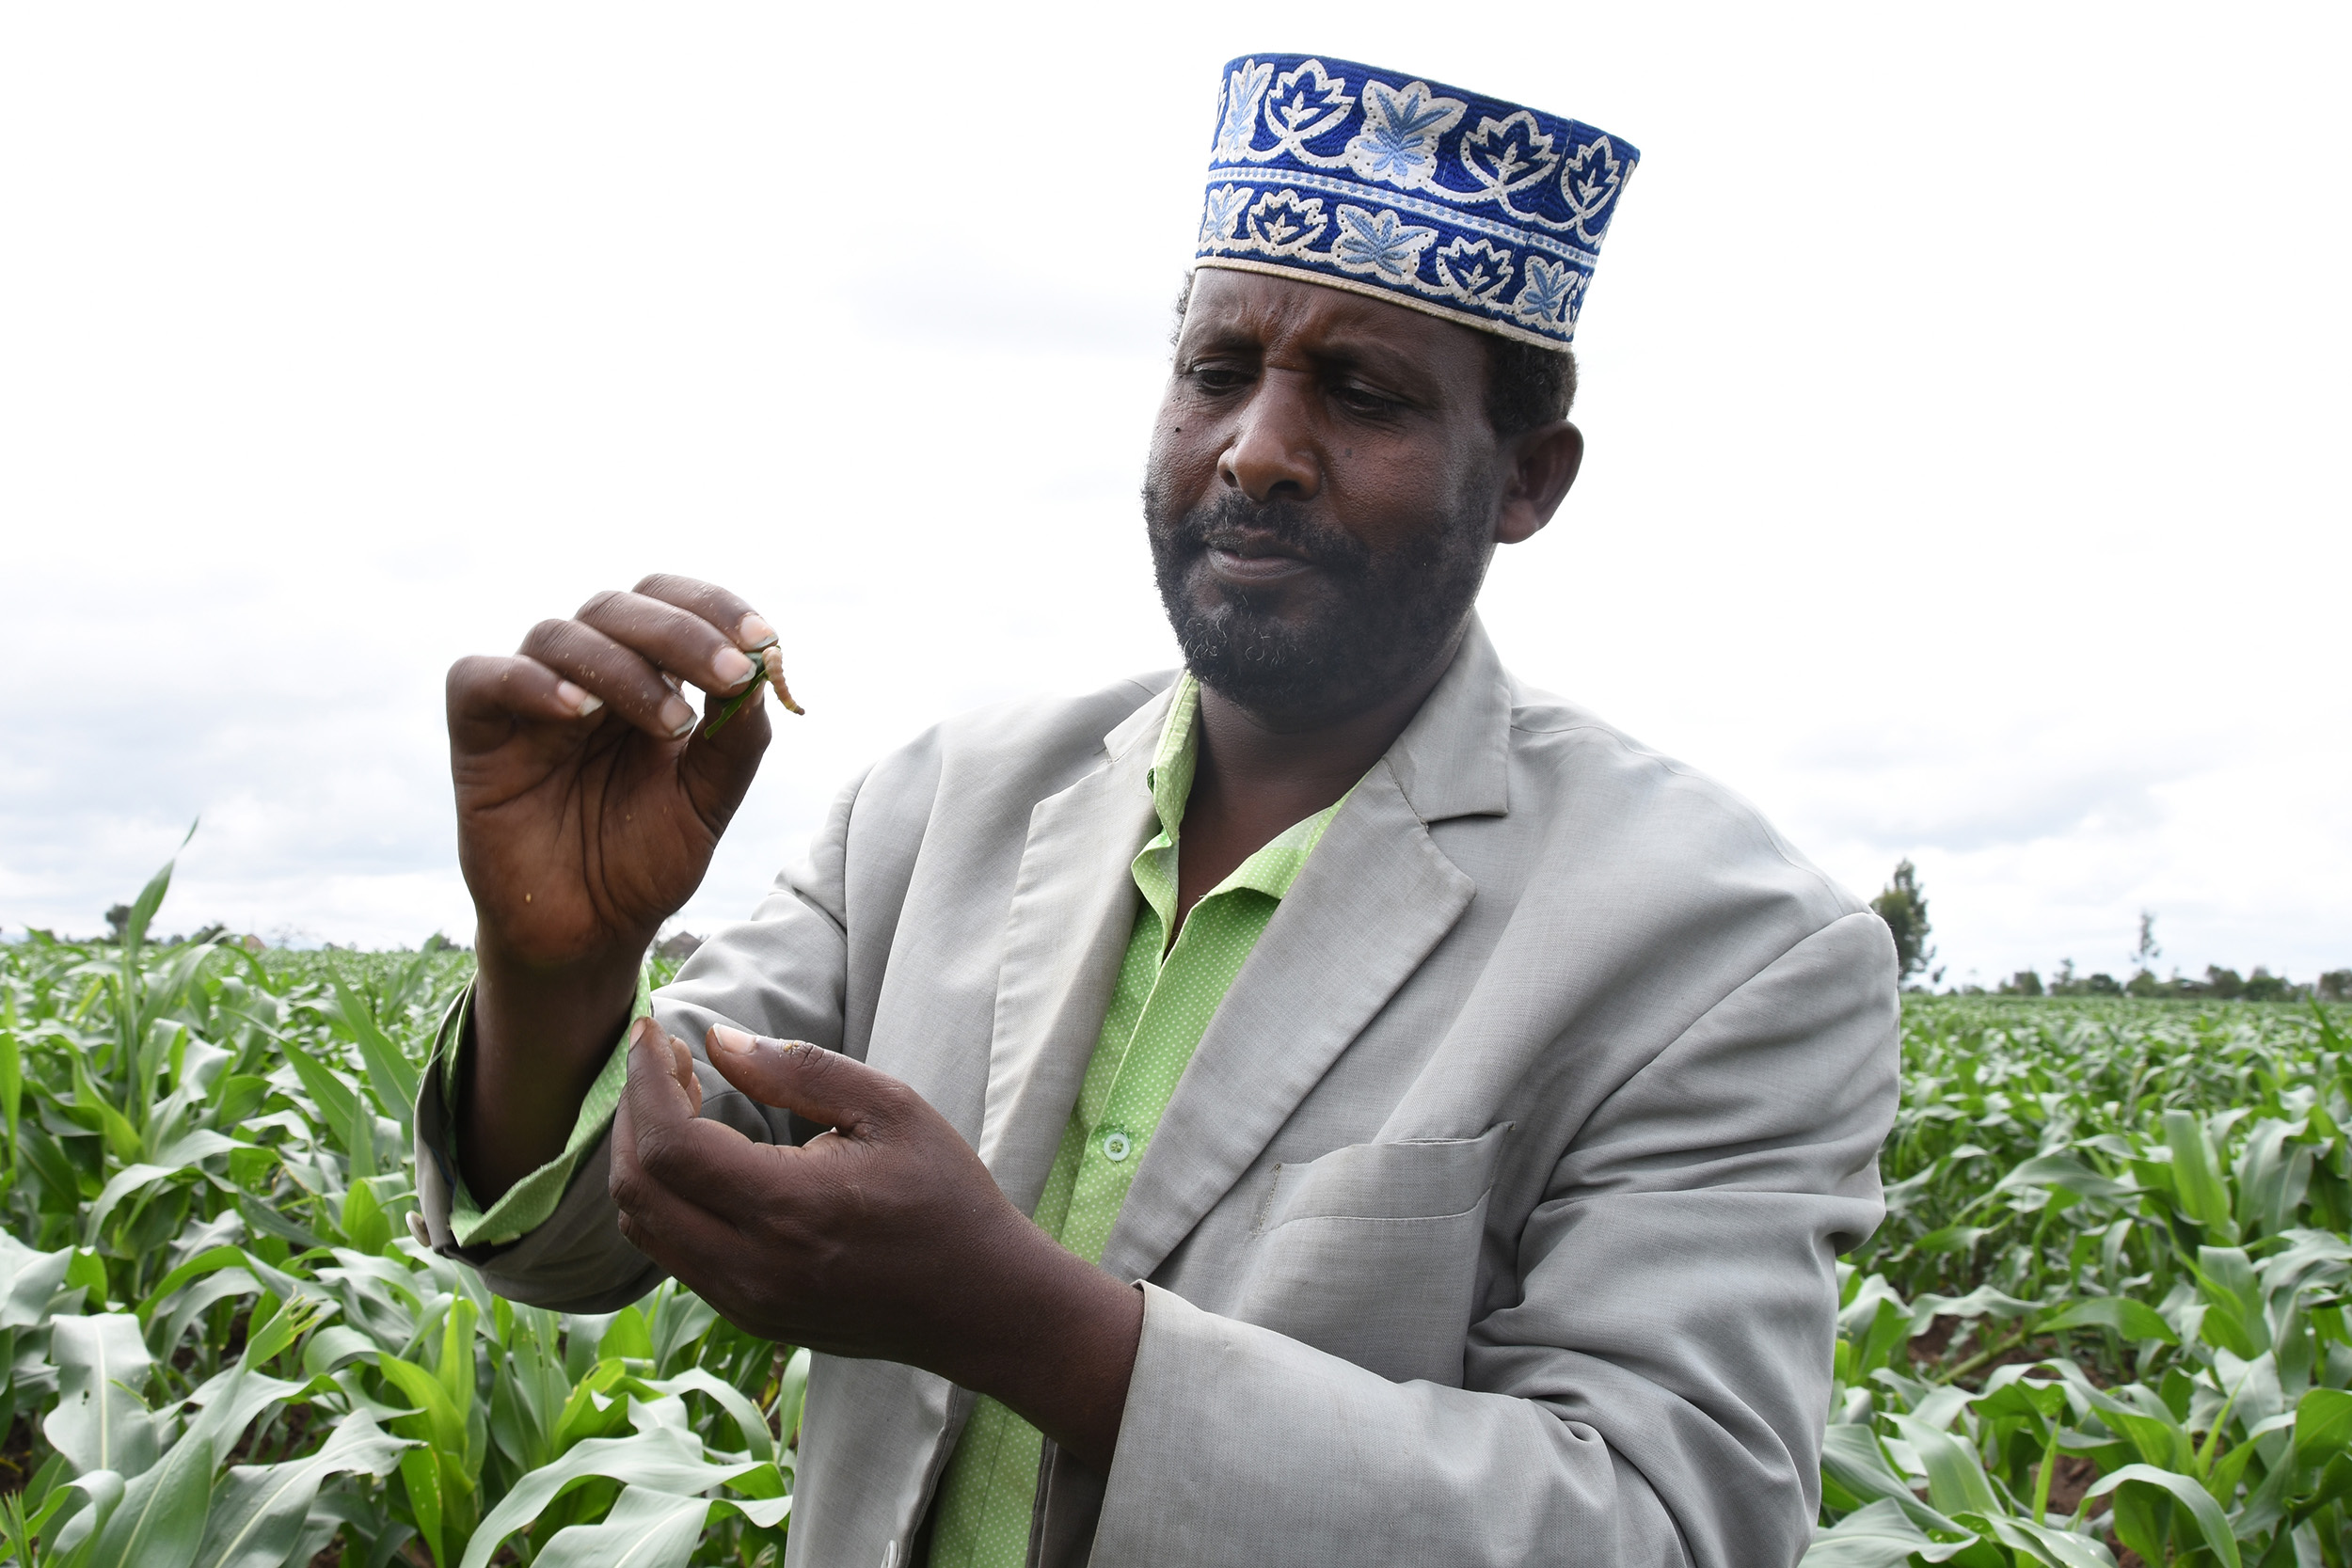  Mohamud Abdu, a farmer in Halaba, Ethiopia, holds a fall armyworm between his fingers. They are easy to find in his field and are causing a lot of damage. Spraying pesticides do not deter the fall armyworm, but the chemicals do damage the maize plan